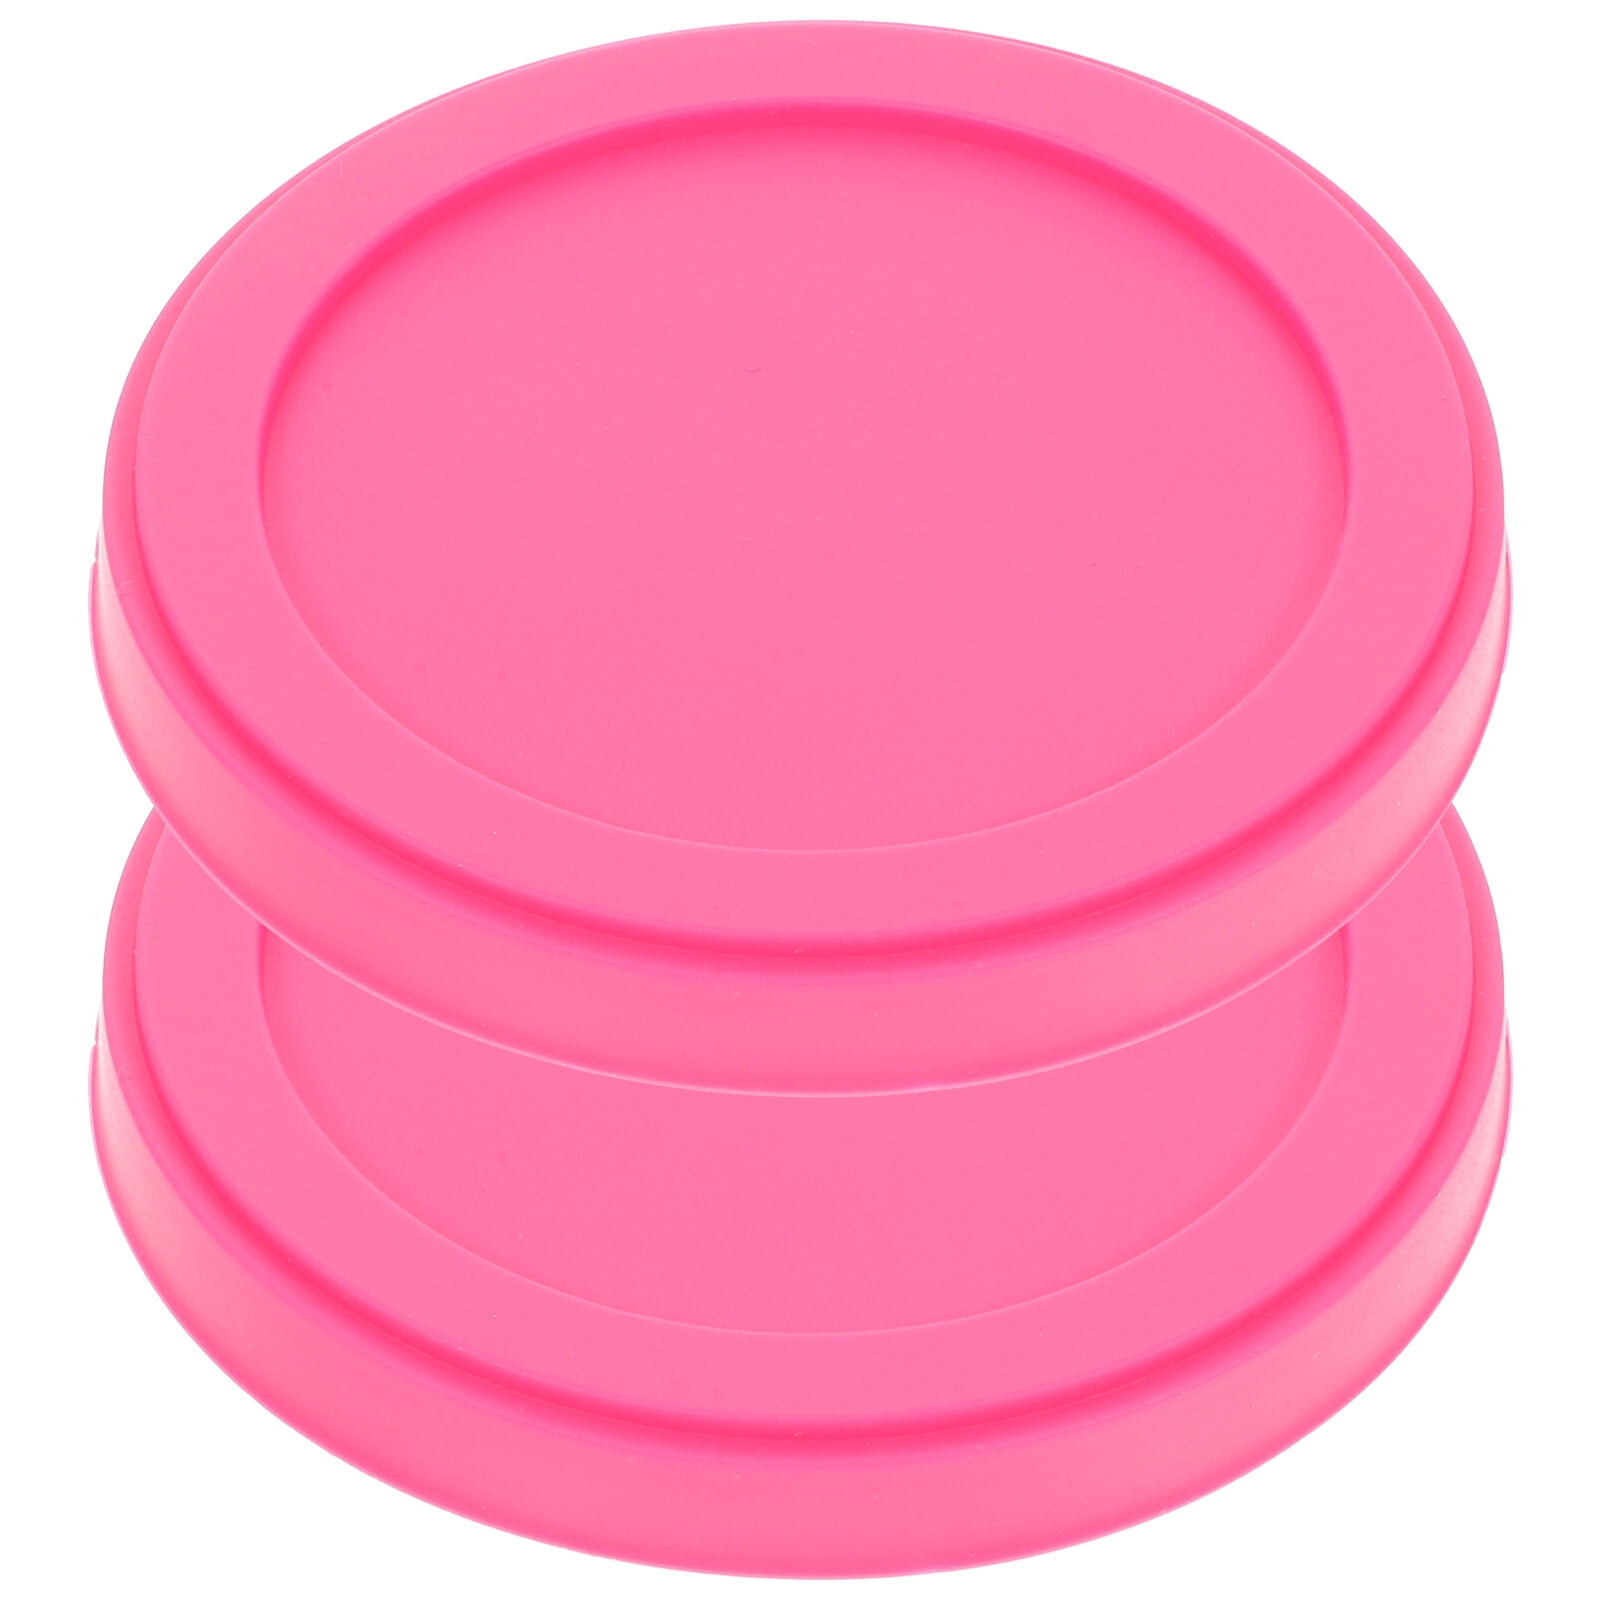 Cup Cover Non-toxic Silicone Round Universal Water Cup Lid Anti